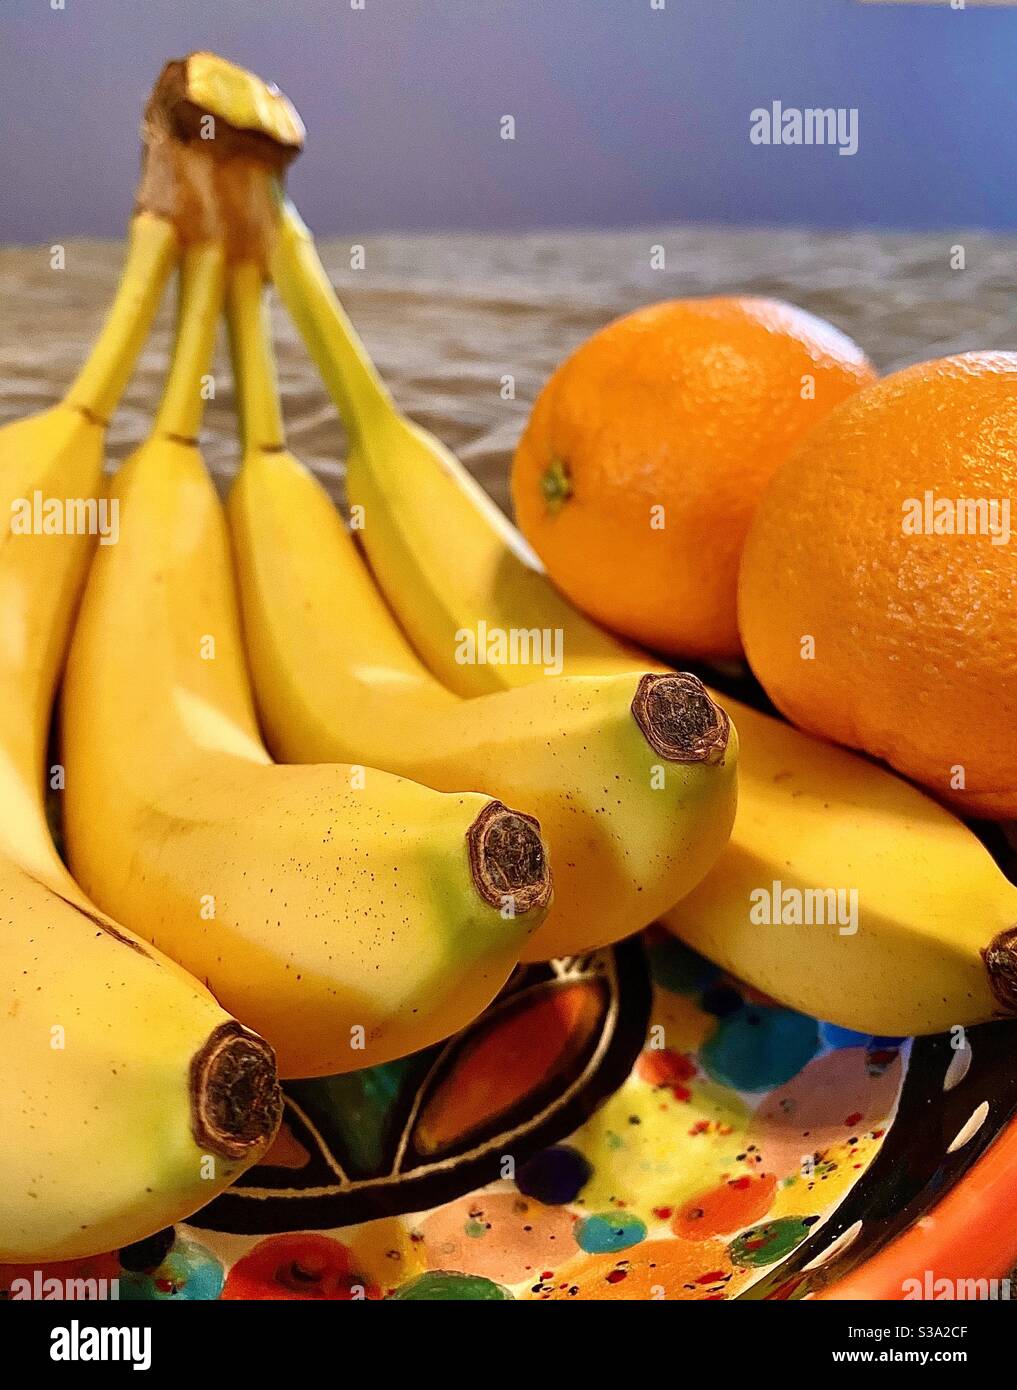 Close Up Of Bananas And Oranges In Colorful Bowl Stock Photo Alamy